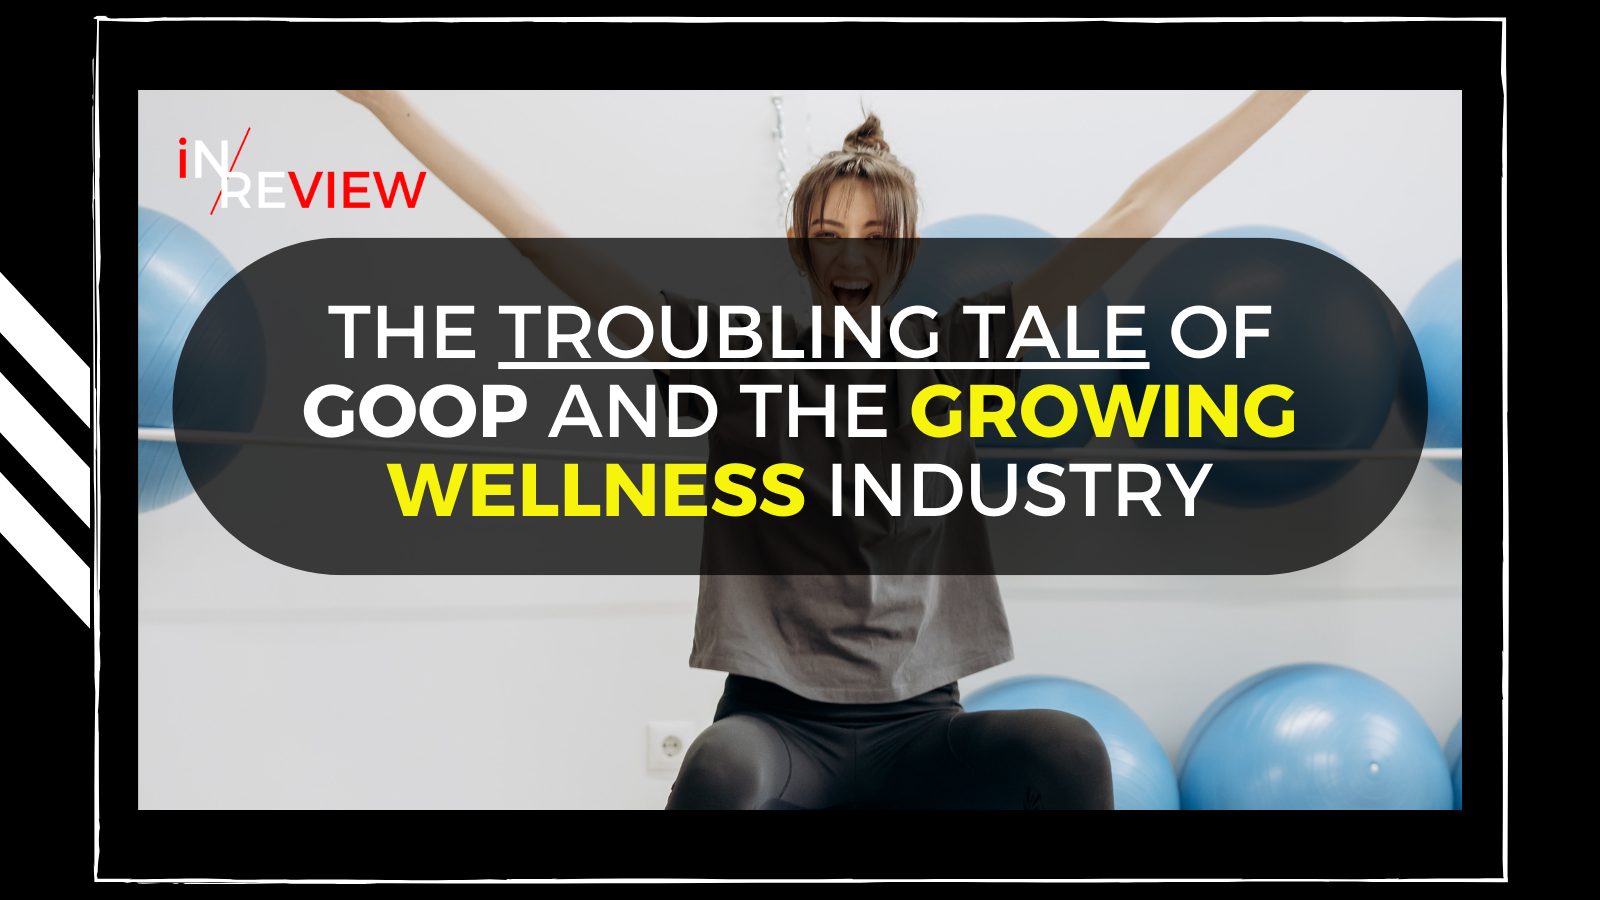 The troubling tale of Goop and the growing wellness industry